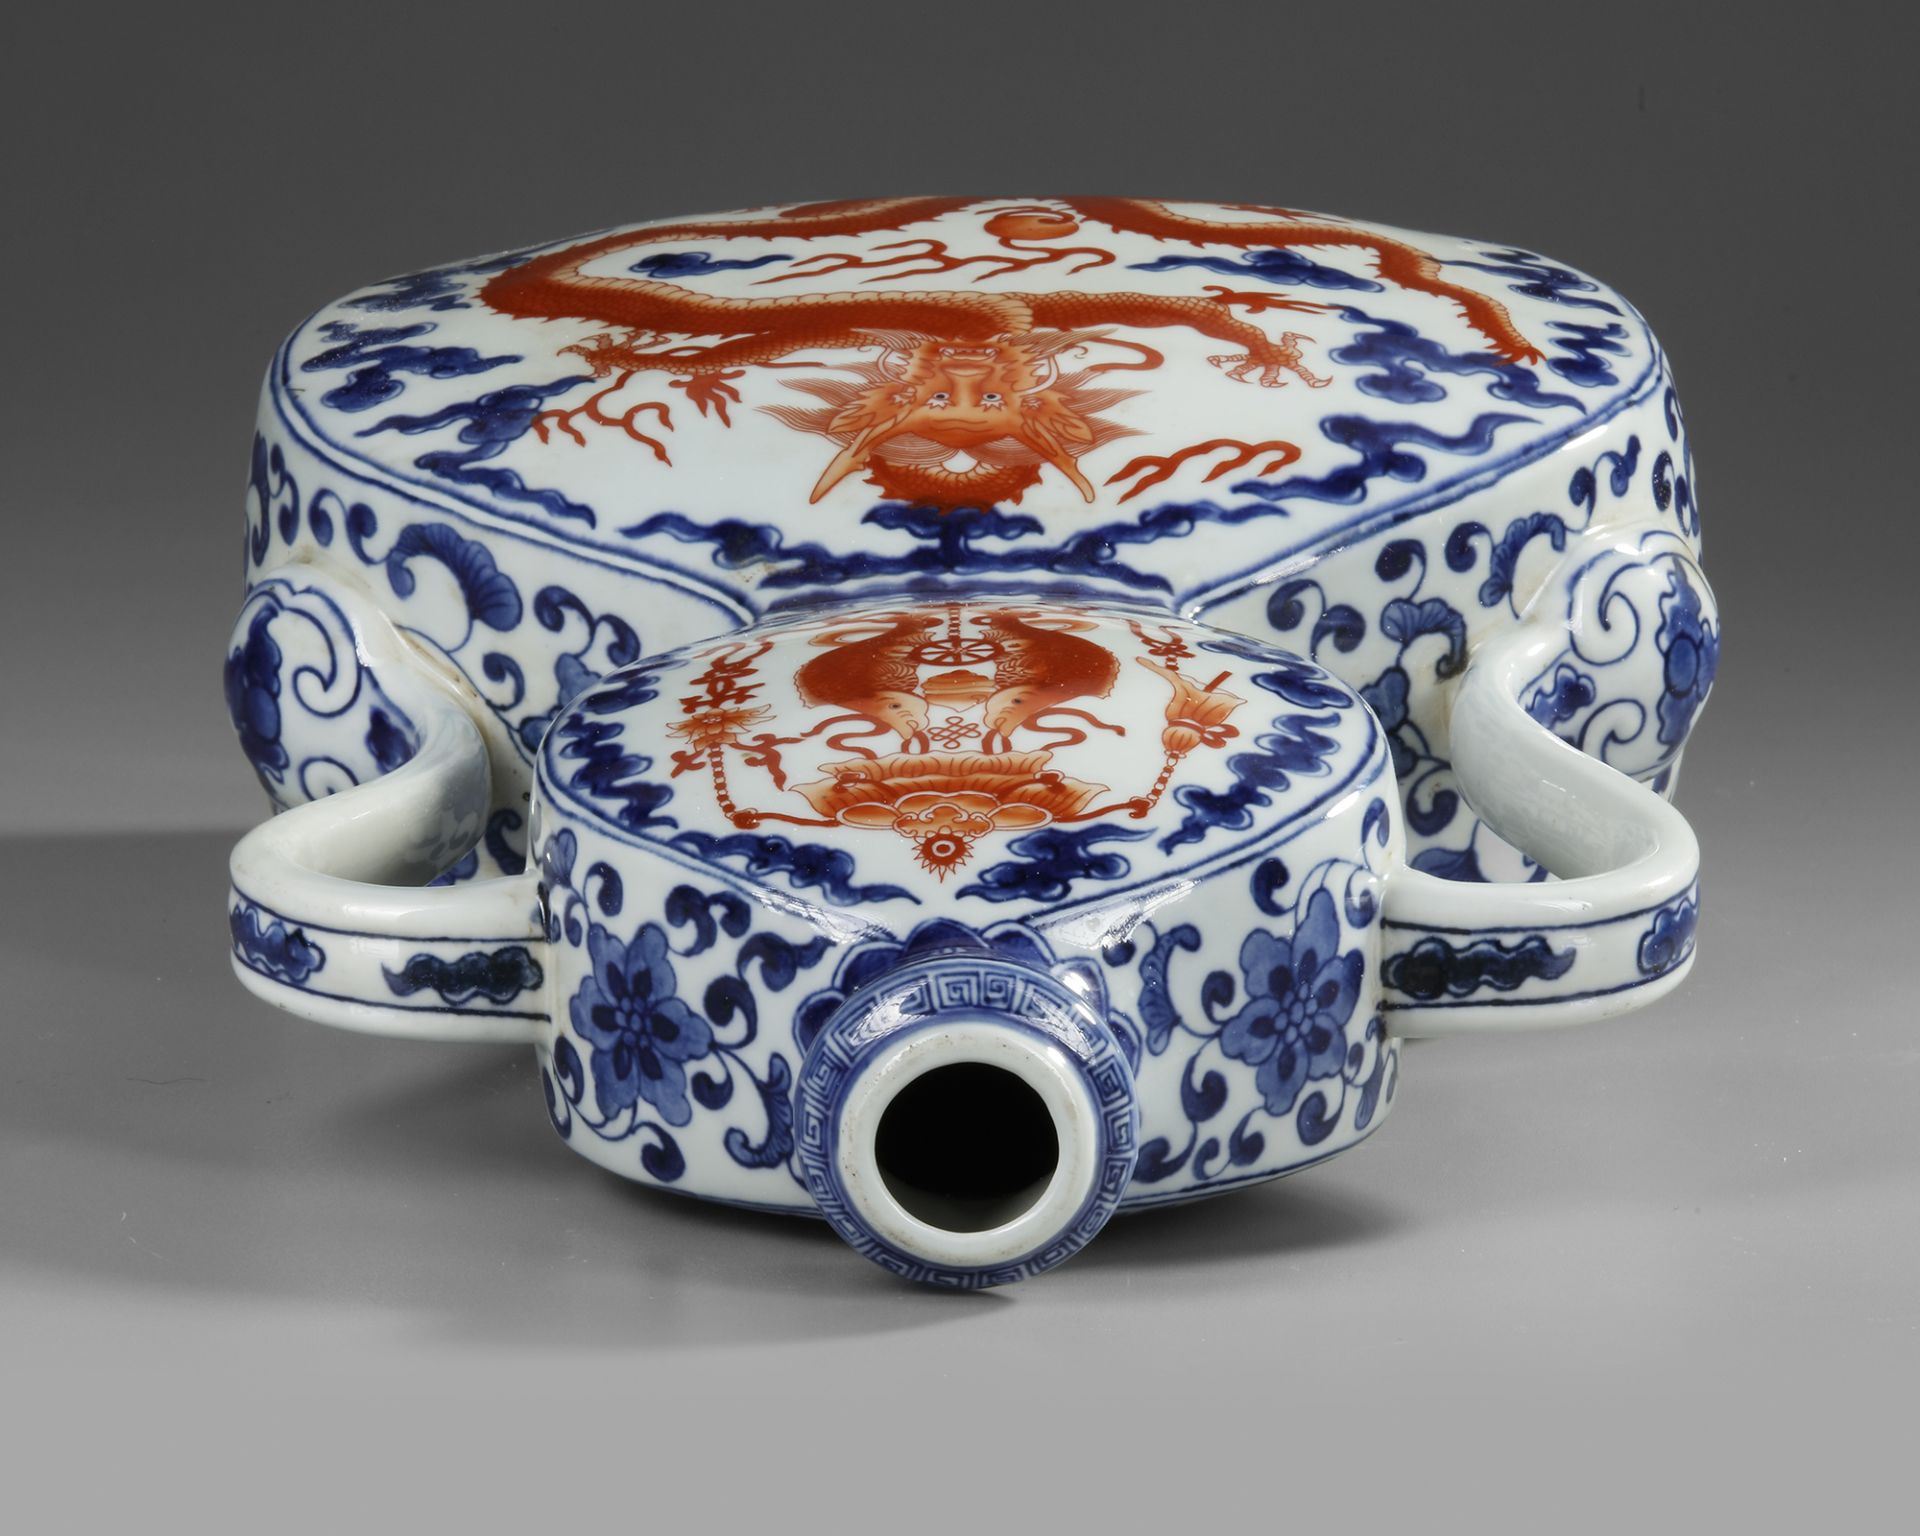 A CHINESE IRON-RED DECORATED BLUE AND WHITE VASE, 19TH-20TH CENTURY - Image 5 of 5